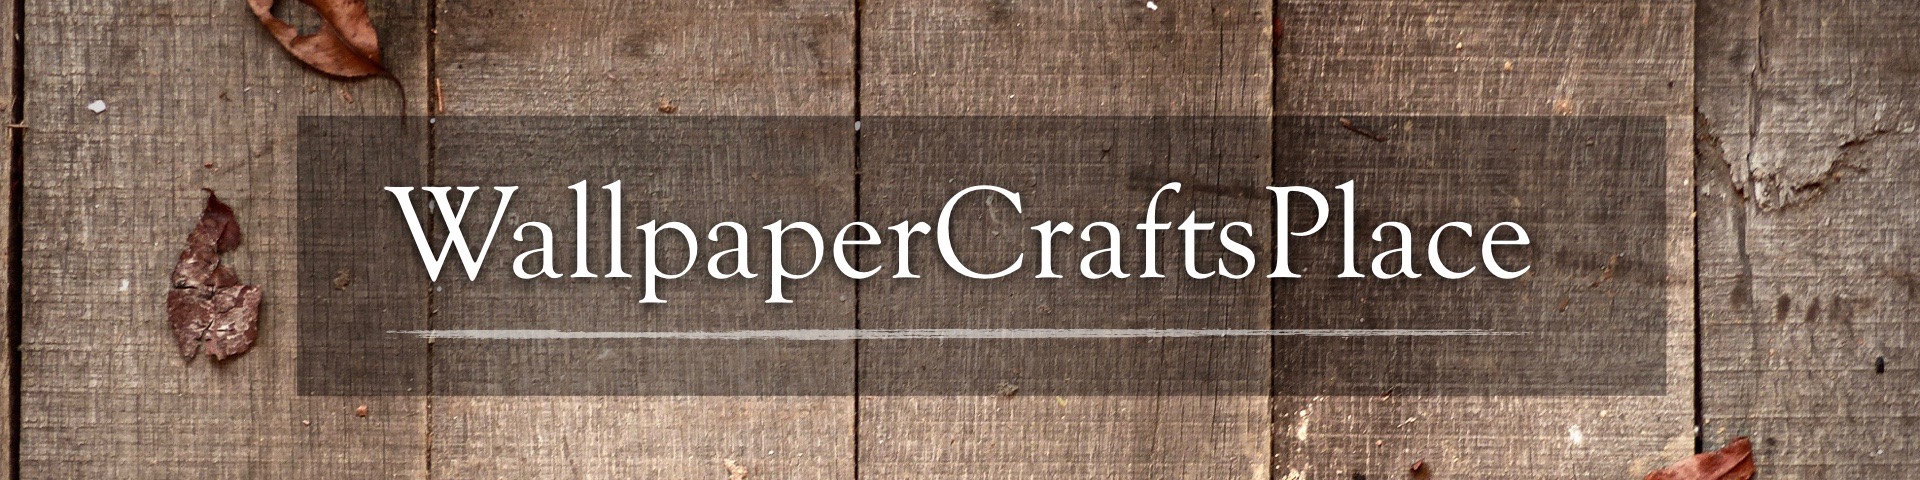 Wallpaper Crafts Place